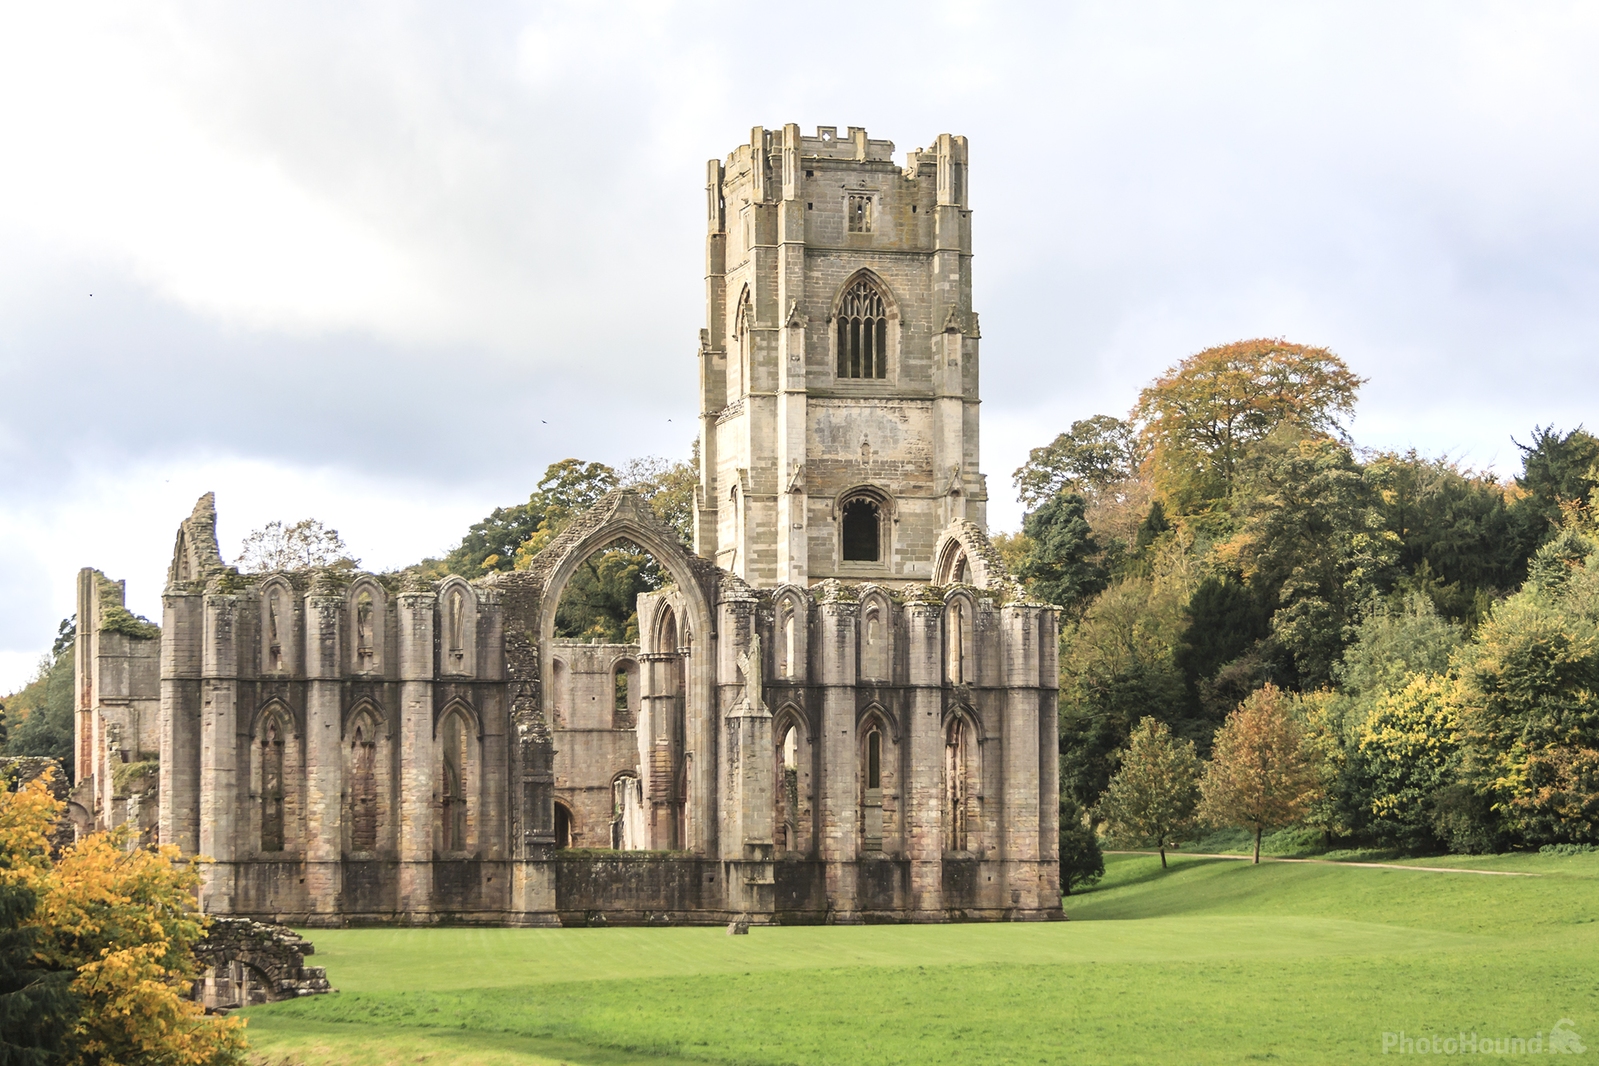 Image of Fountains Abbey by Carol Henson